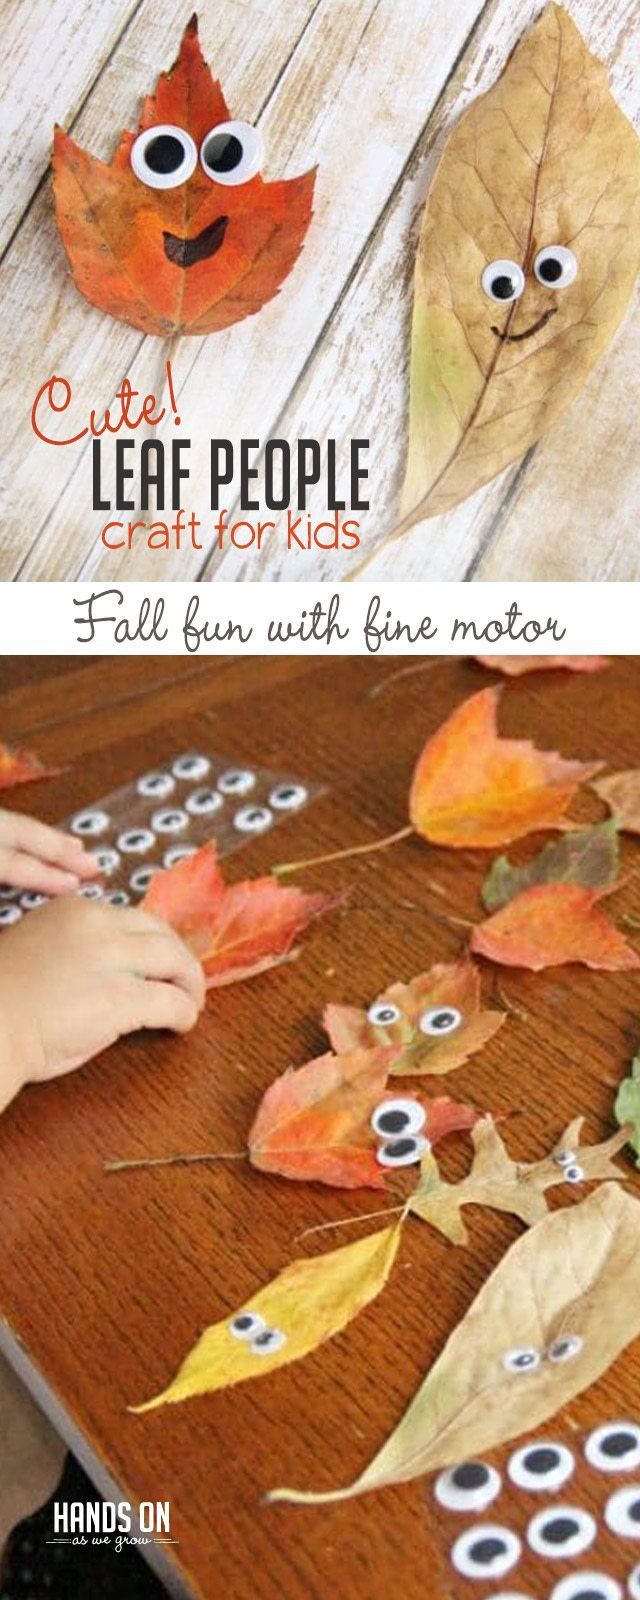 Kids of all ages will love making this leaf people fall craft with real leaves as they build fine motor skills and make memories this fall! -   24 fun fall crafts
 ideas